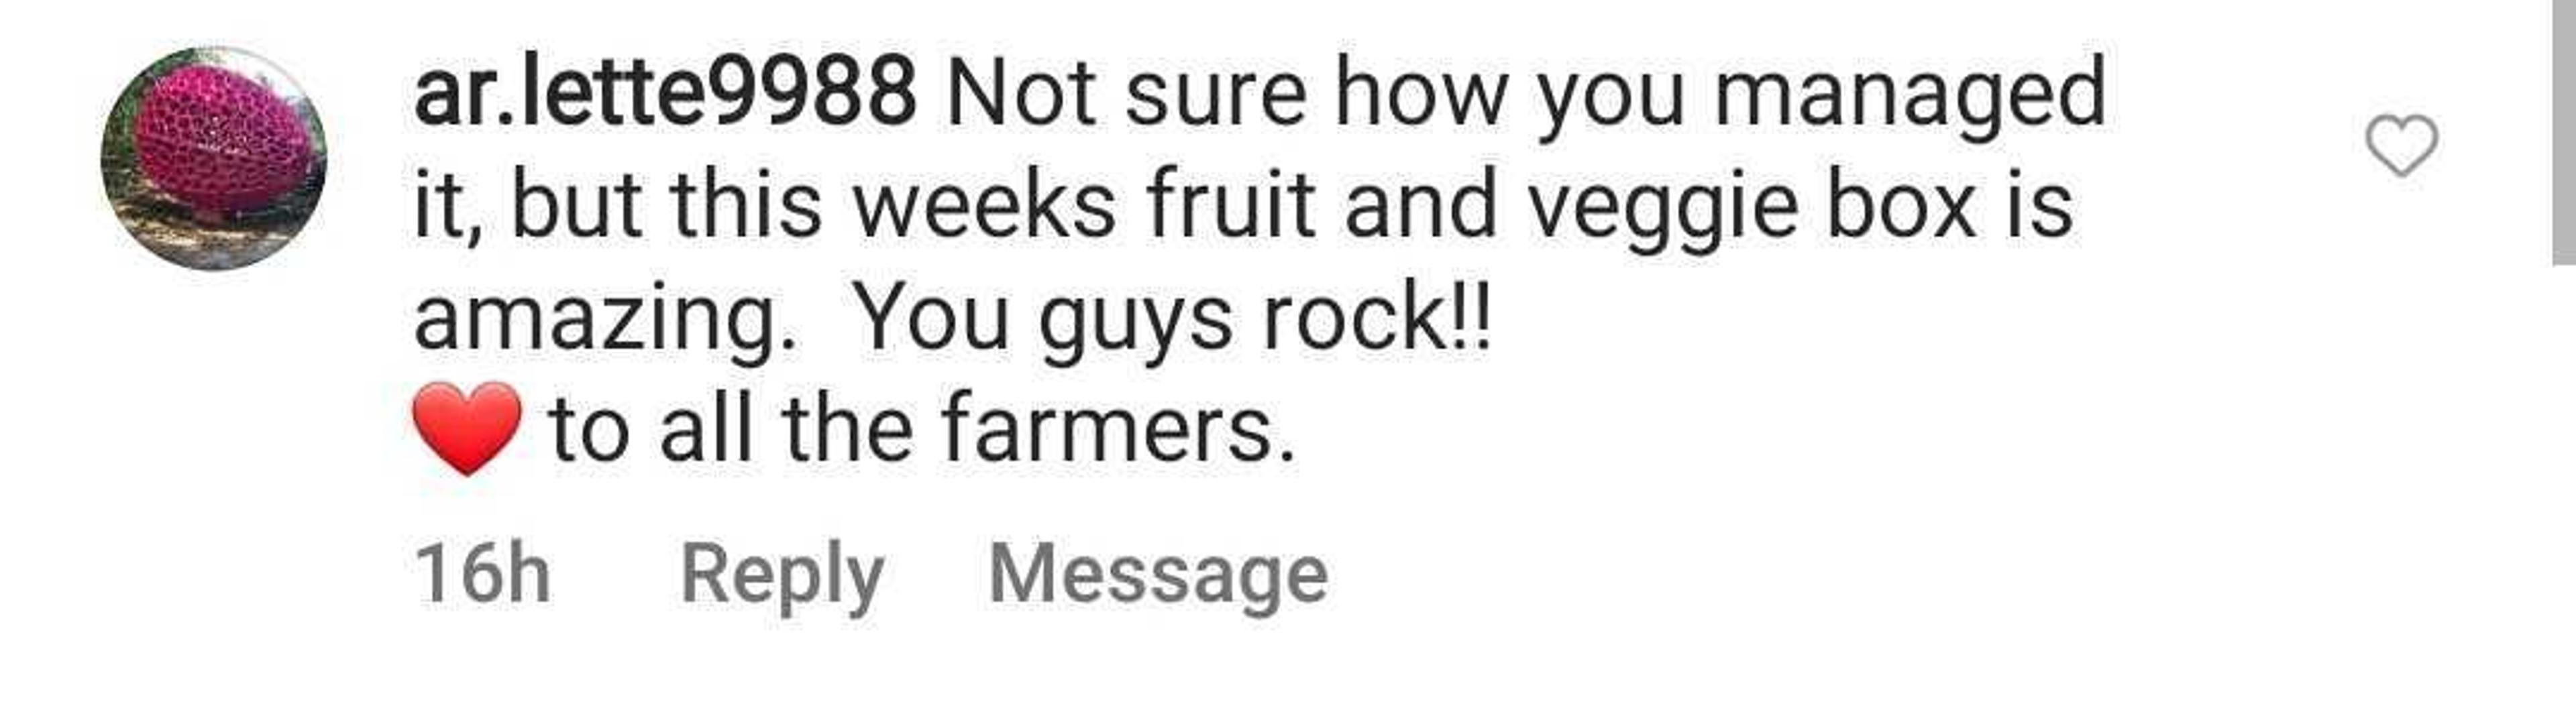 A comment on social media from ar.letter9988 that reads: Not sure how you managed it, but this weeks fruit and veggie box is amazing. You guys rock!! Love to all the farmers.